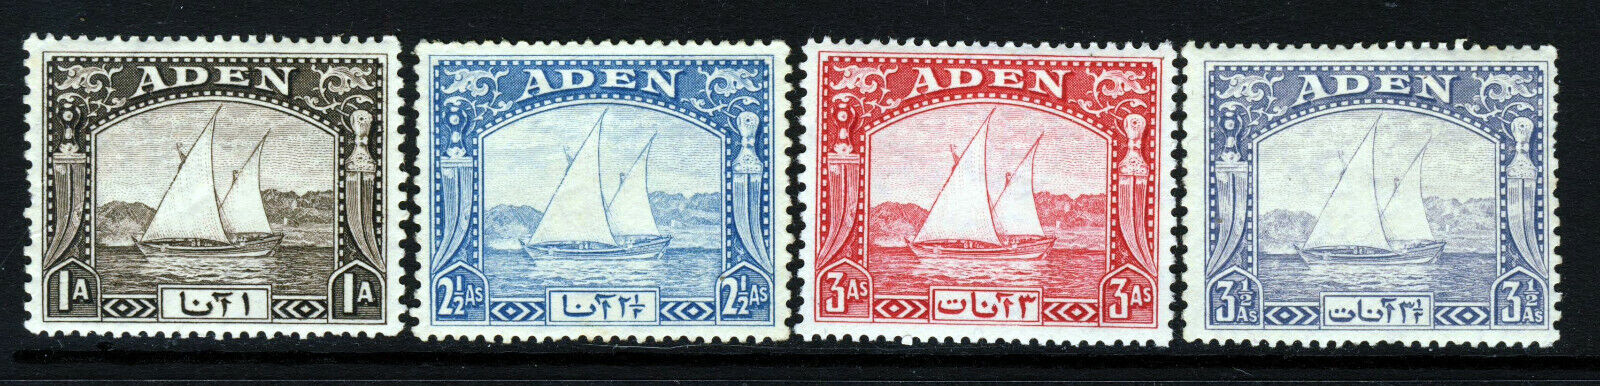 ADEN 1937 Arab Dhows Group SG 7 New item Superior MINT to 3